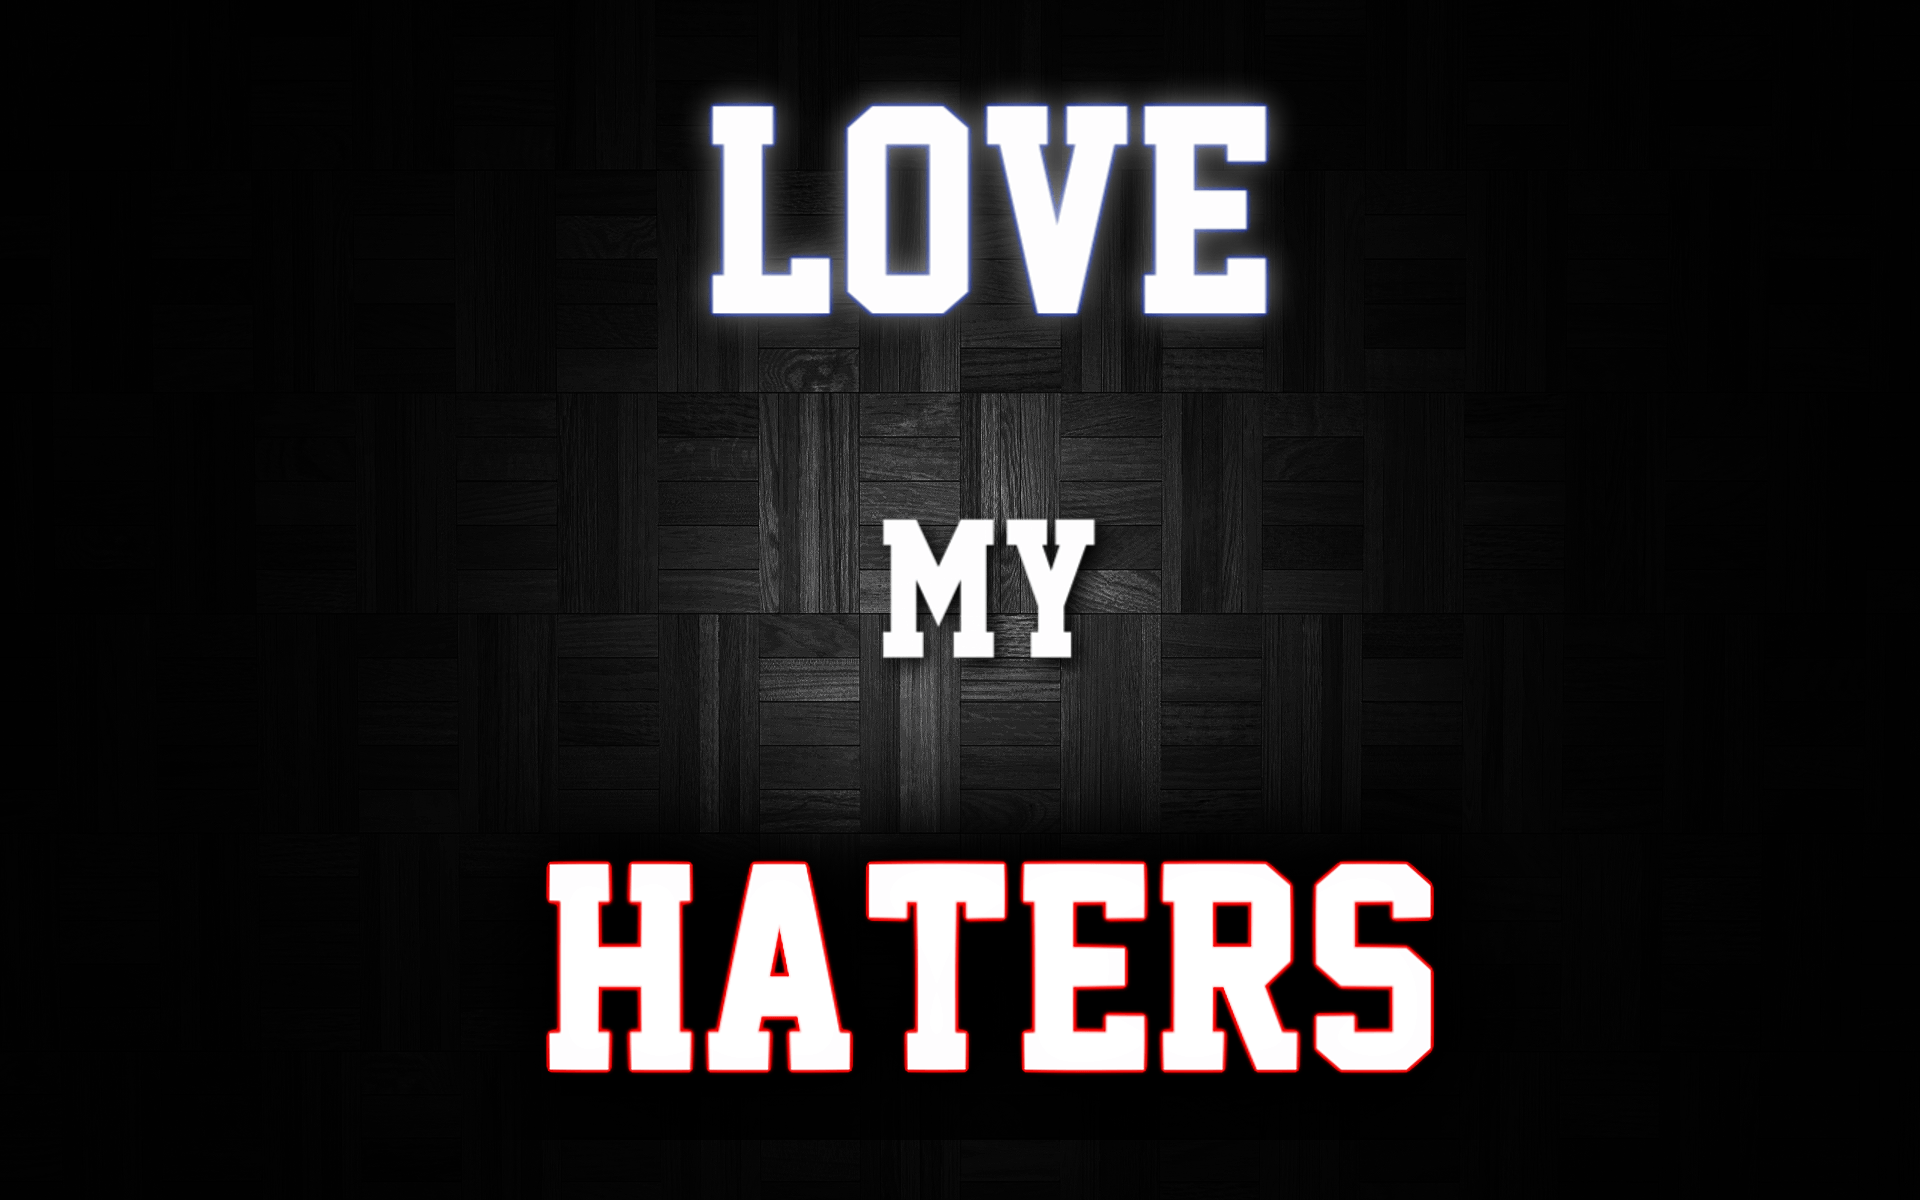 Haters Wallpaper. I Love My Haters Wallpaper, Haters I Hate Wallpaper and Haters Gonna Hate Wallpaper